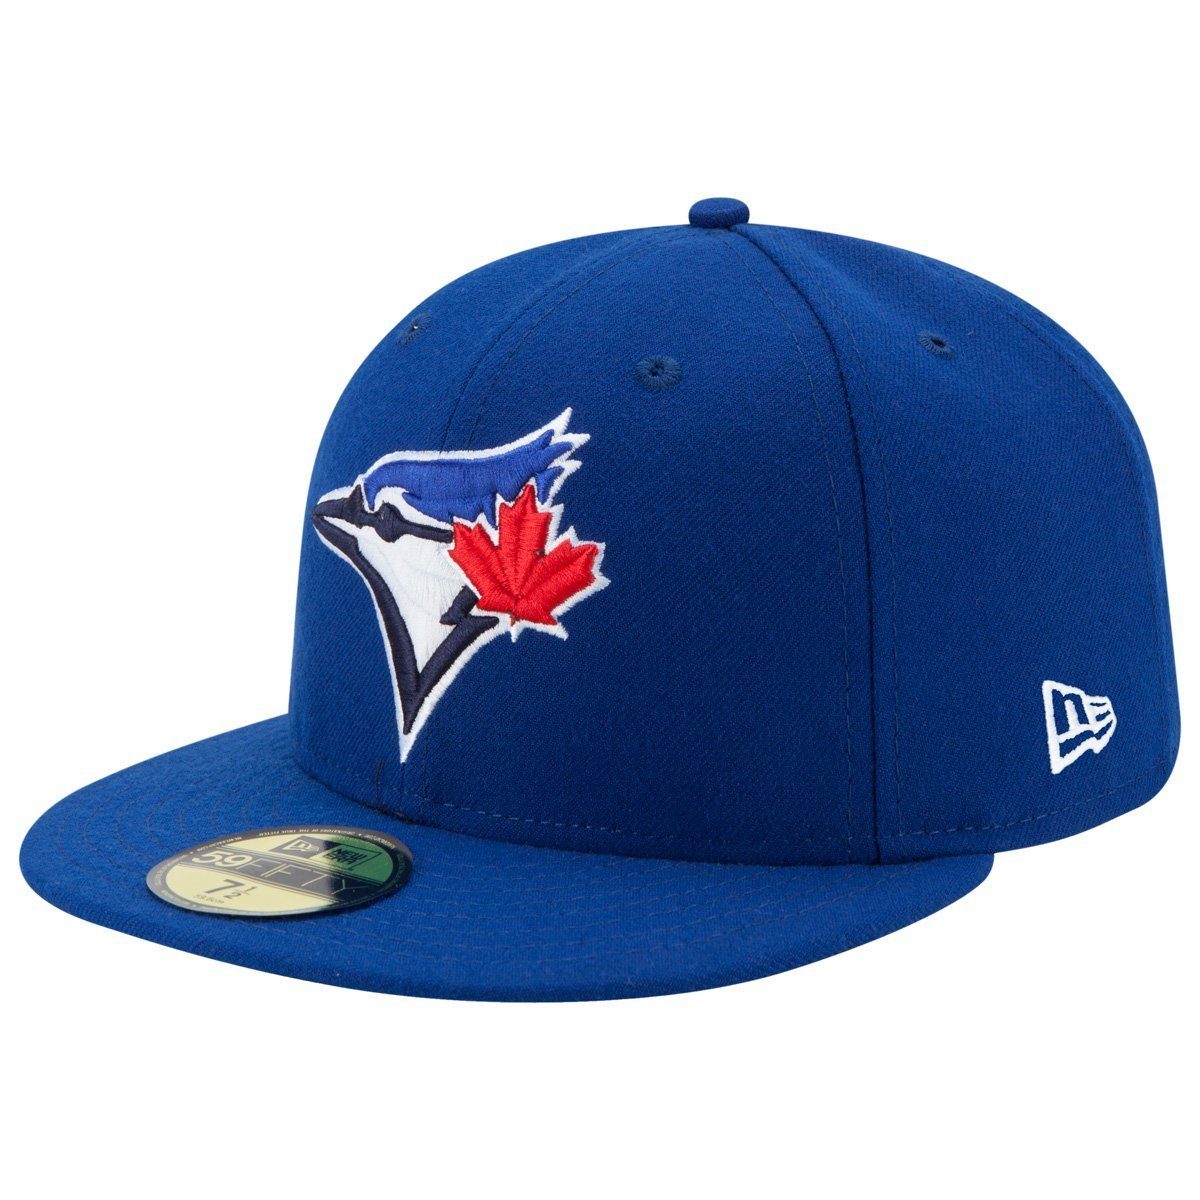 New Era Fitted Cap 59Fifty AUTHENTIC ONFIELD Toronto Jays